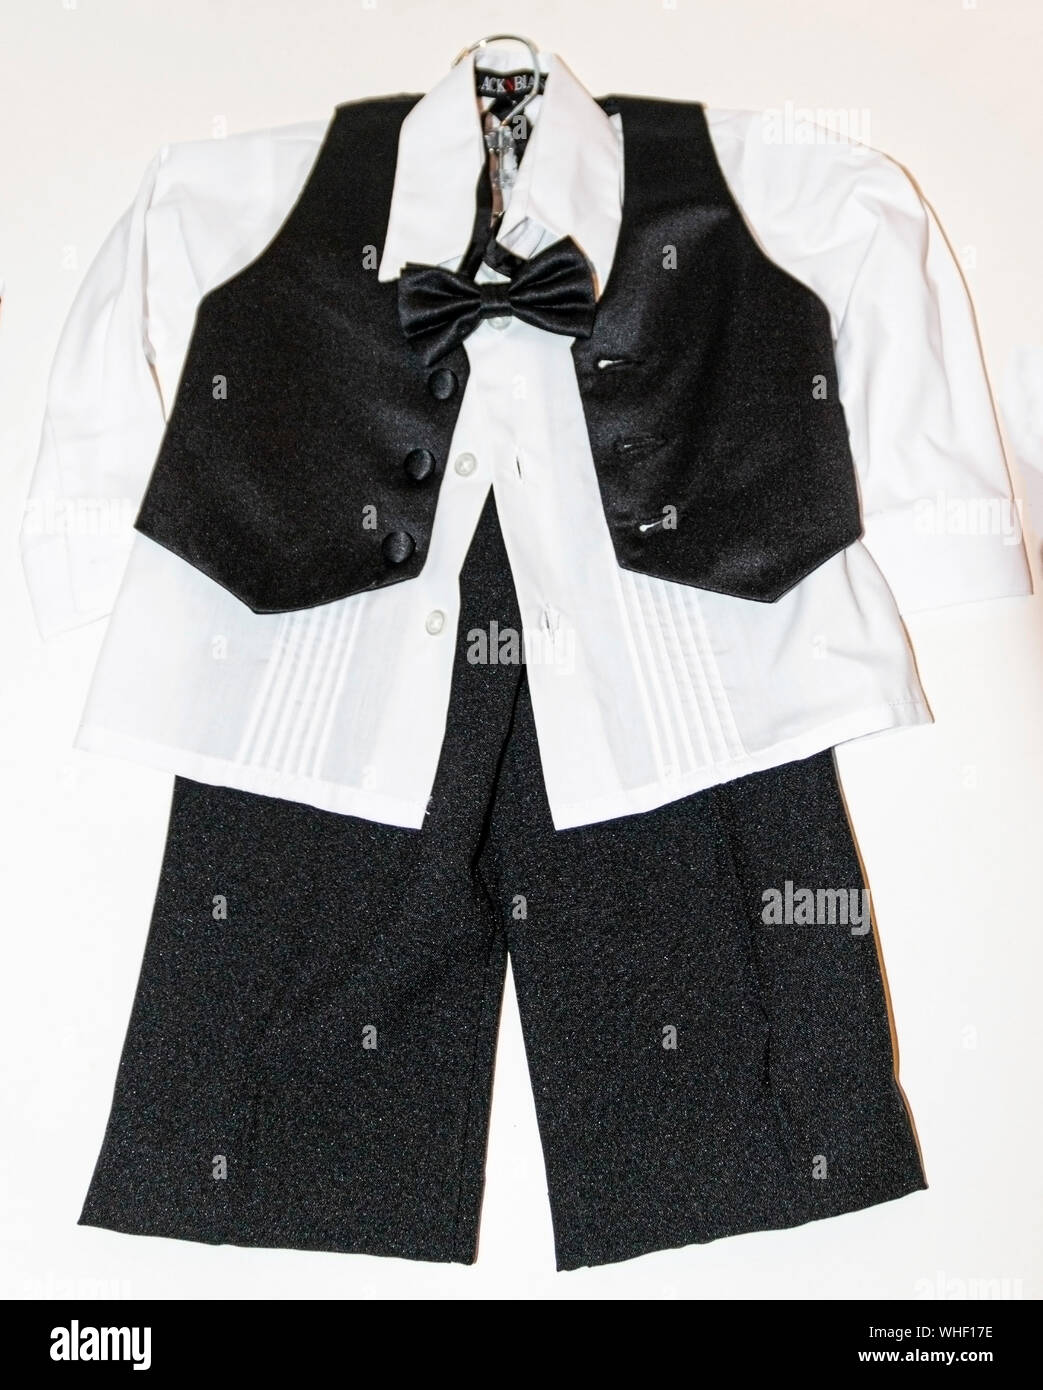 Toddlers tuxedo with a black vest over a white shirt with a white backgound hanging on a hanger with no jacket. Stock Photo